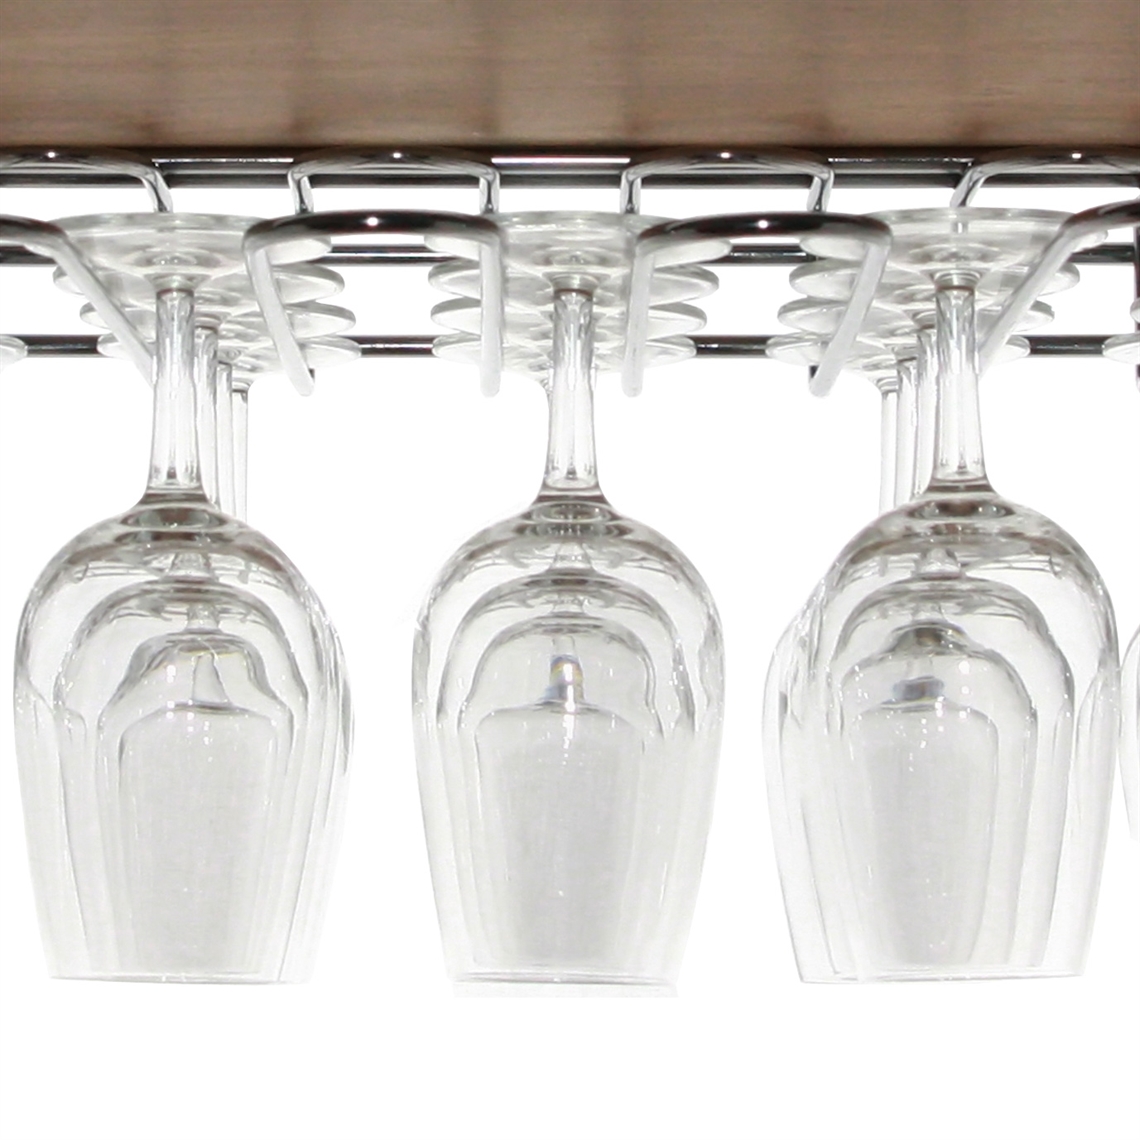 View more glass storage boxes from our Wine Glass Hanging Racks range